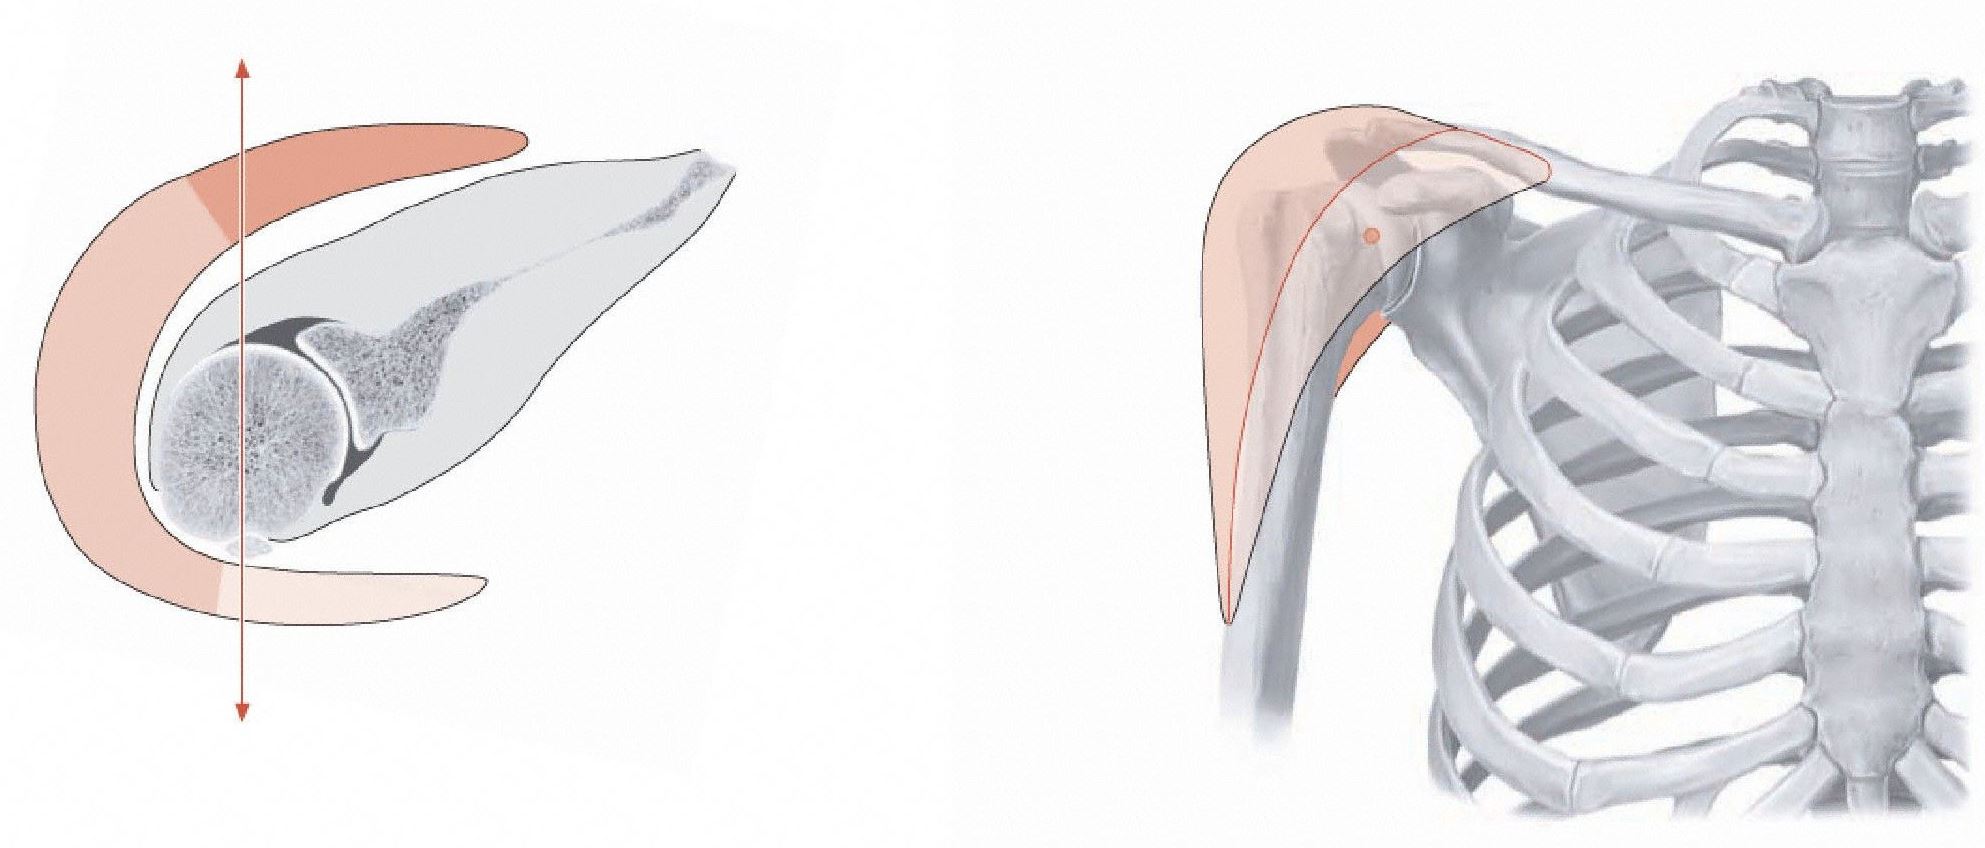 Drawing showing the three parts of the deltoid muscle in relation to the glenohumeral joint.